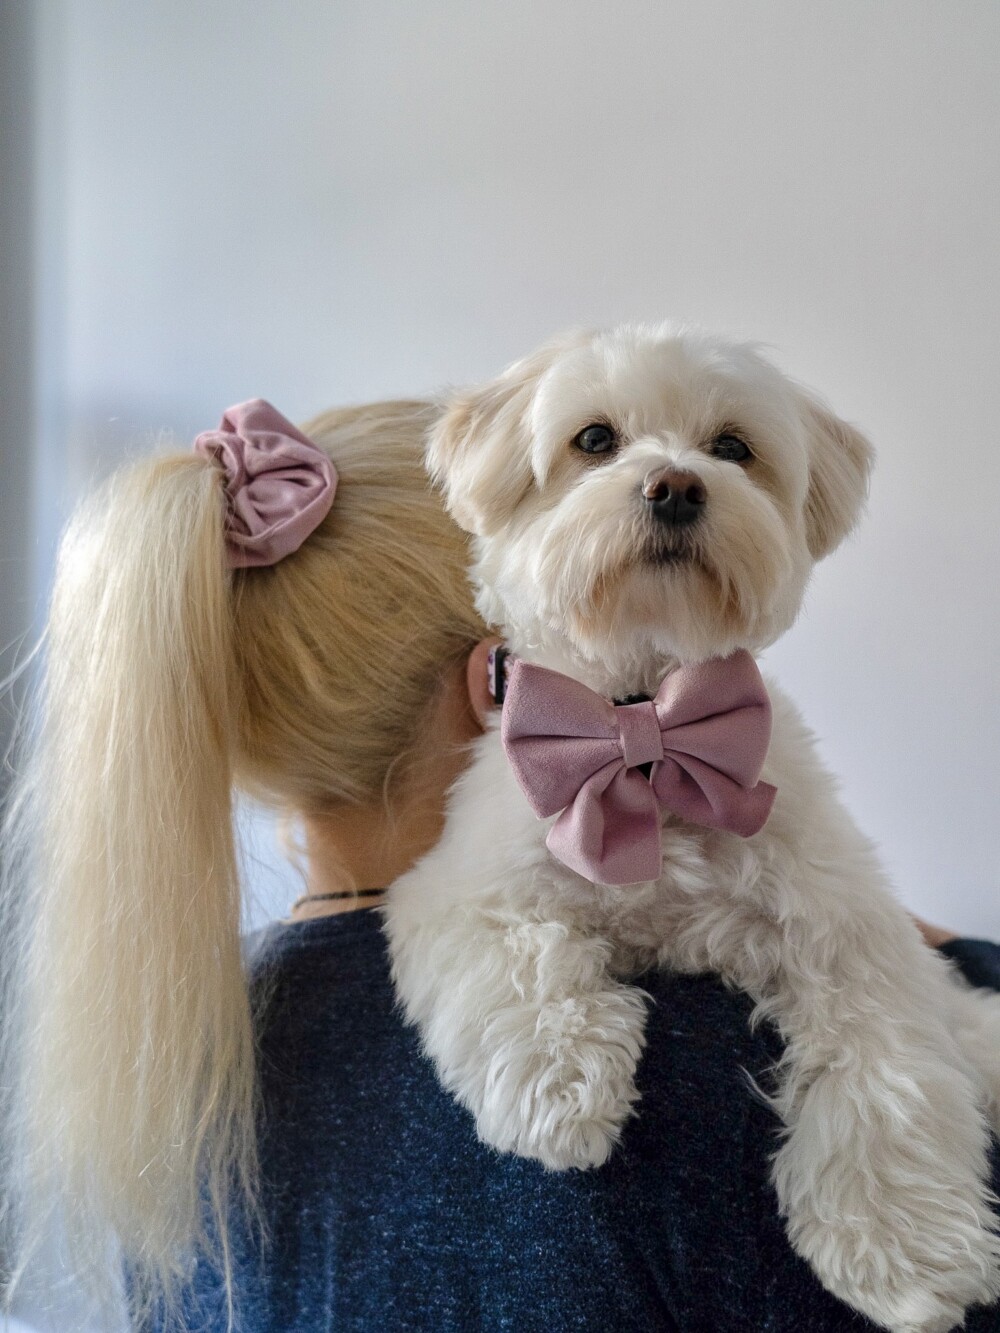 a blonde haired woman with her back to the camera and a cute pink scrunchie in her hair. she is holding a white fluffy dog who is wearing a matching large sailor bow.